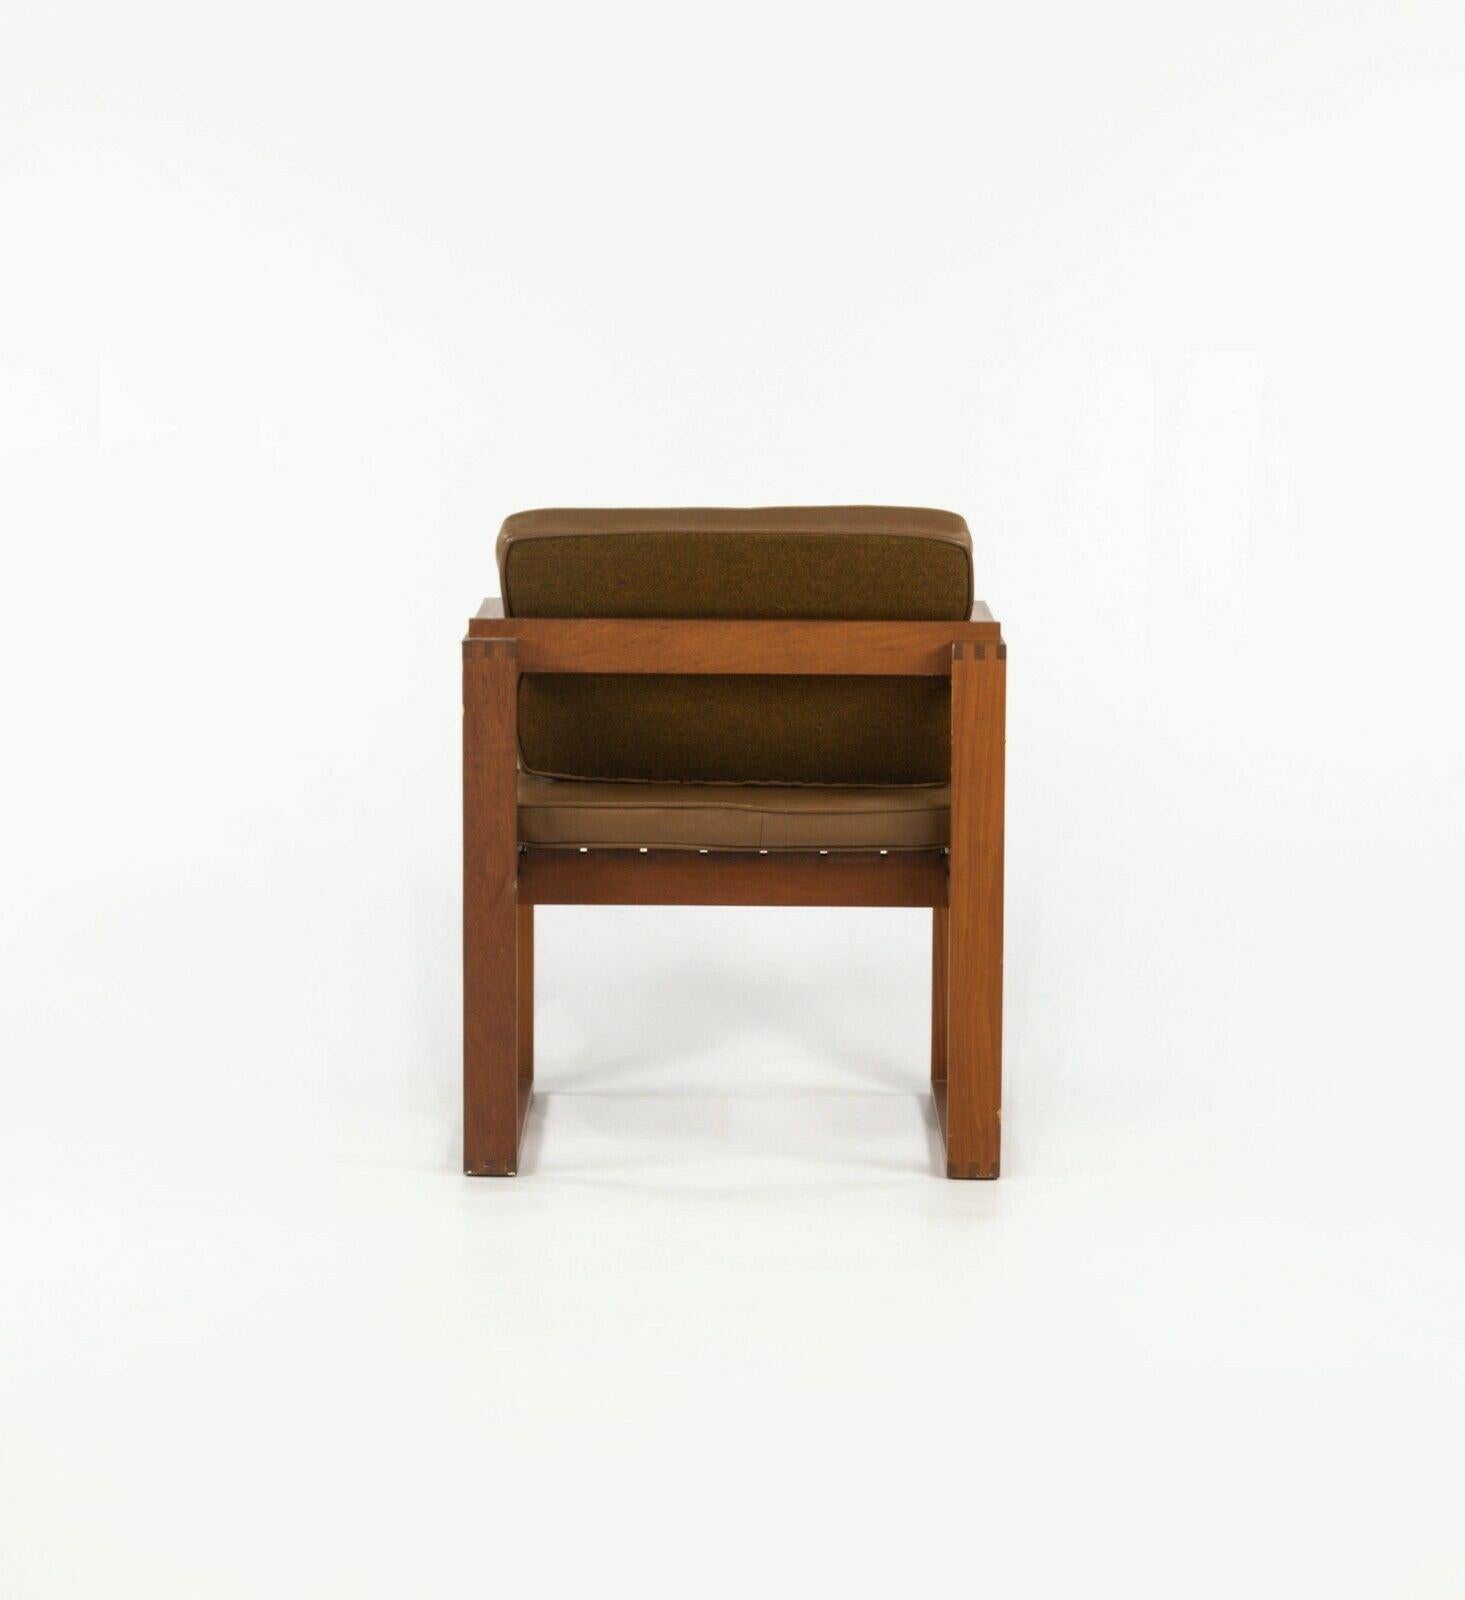 Late 20th Century 1975 Pair of Bodil Kjaer Teak & Leather Slat Seat Chairs by CI Designs of Boston For Sale